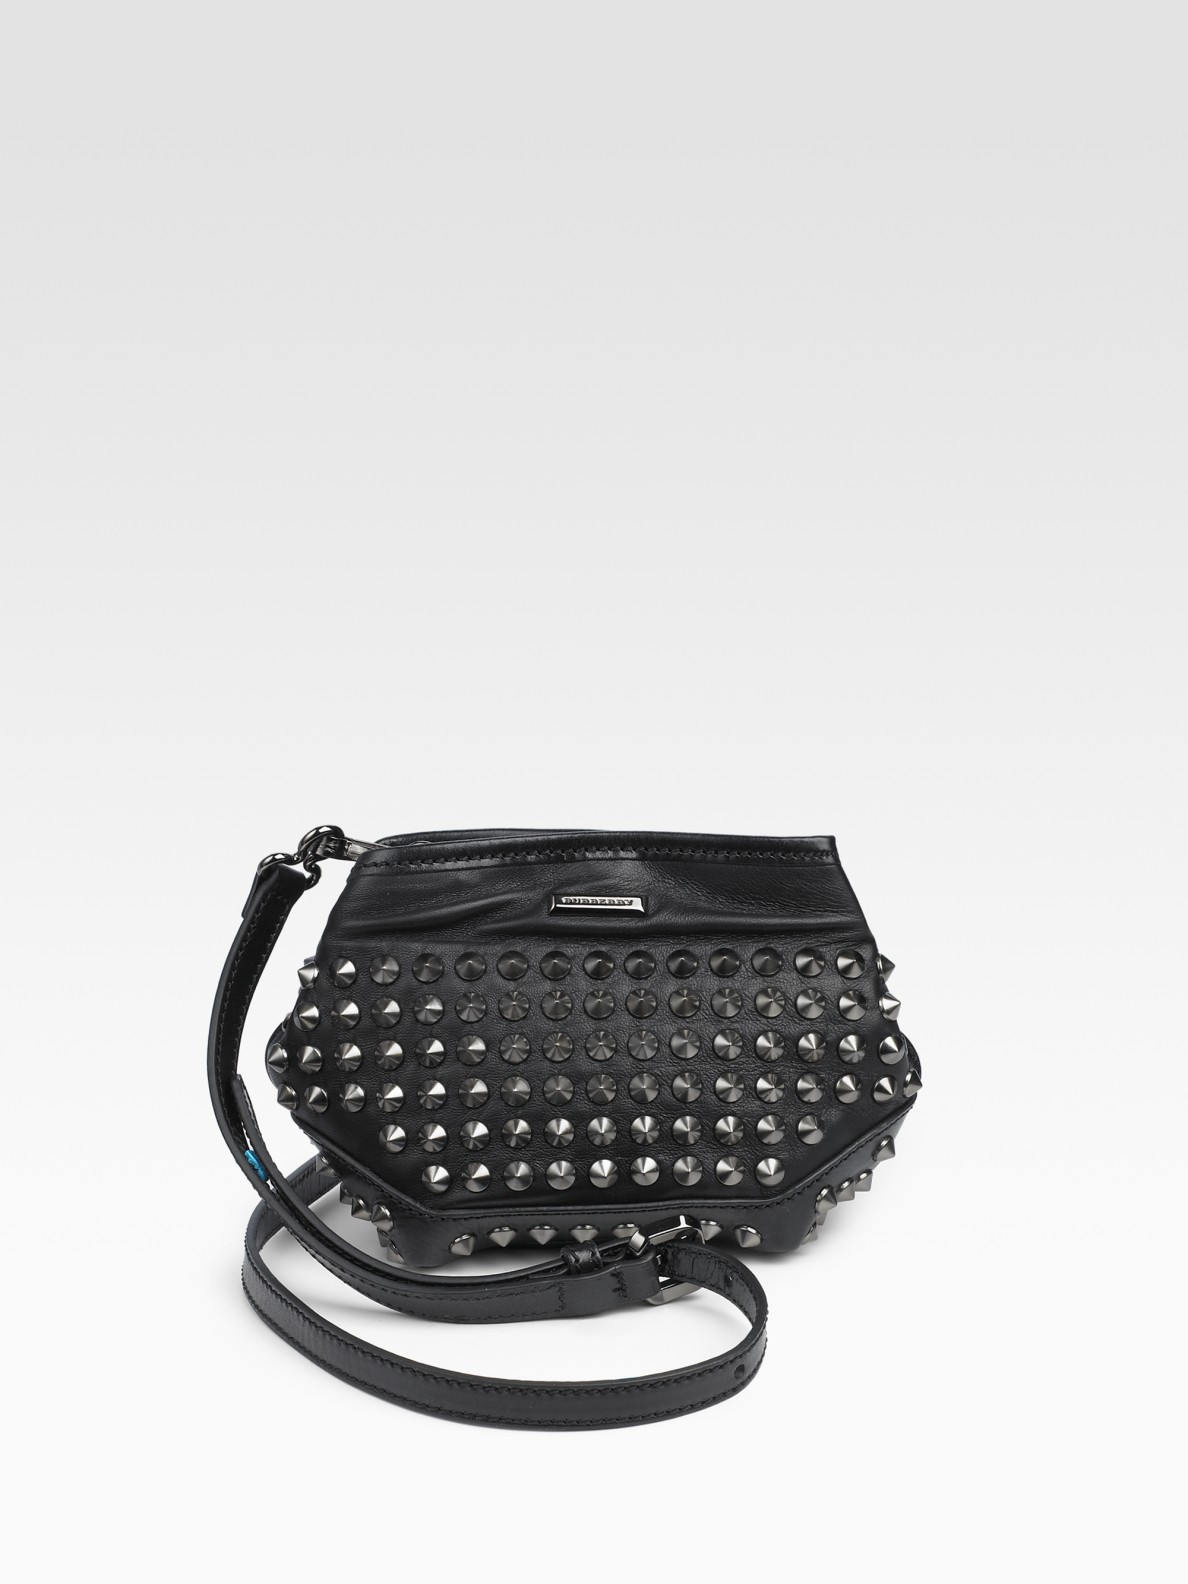 Burberry Studded Leather Crossbody Bag in Black | Lyst